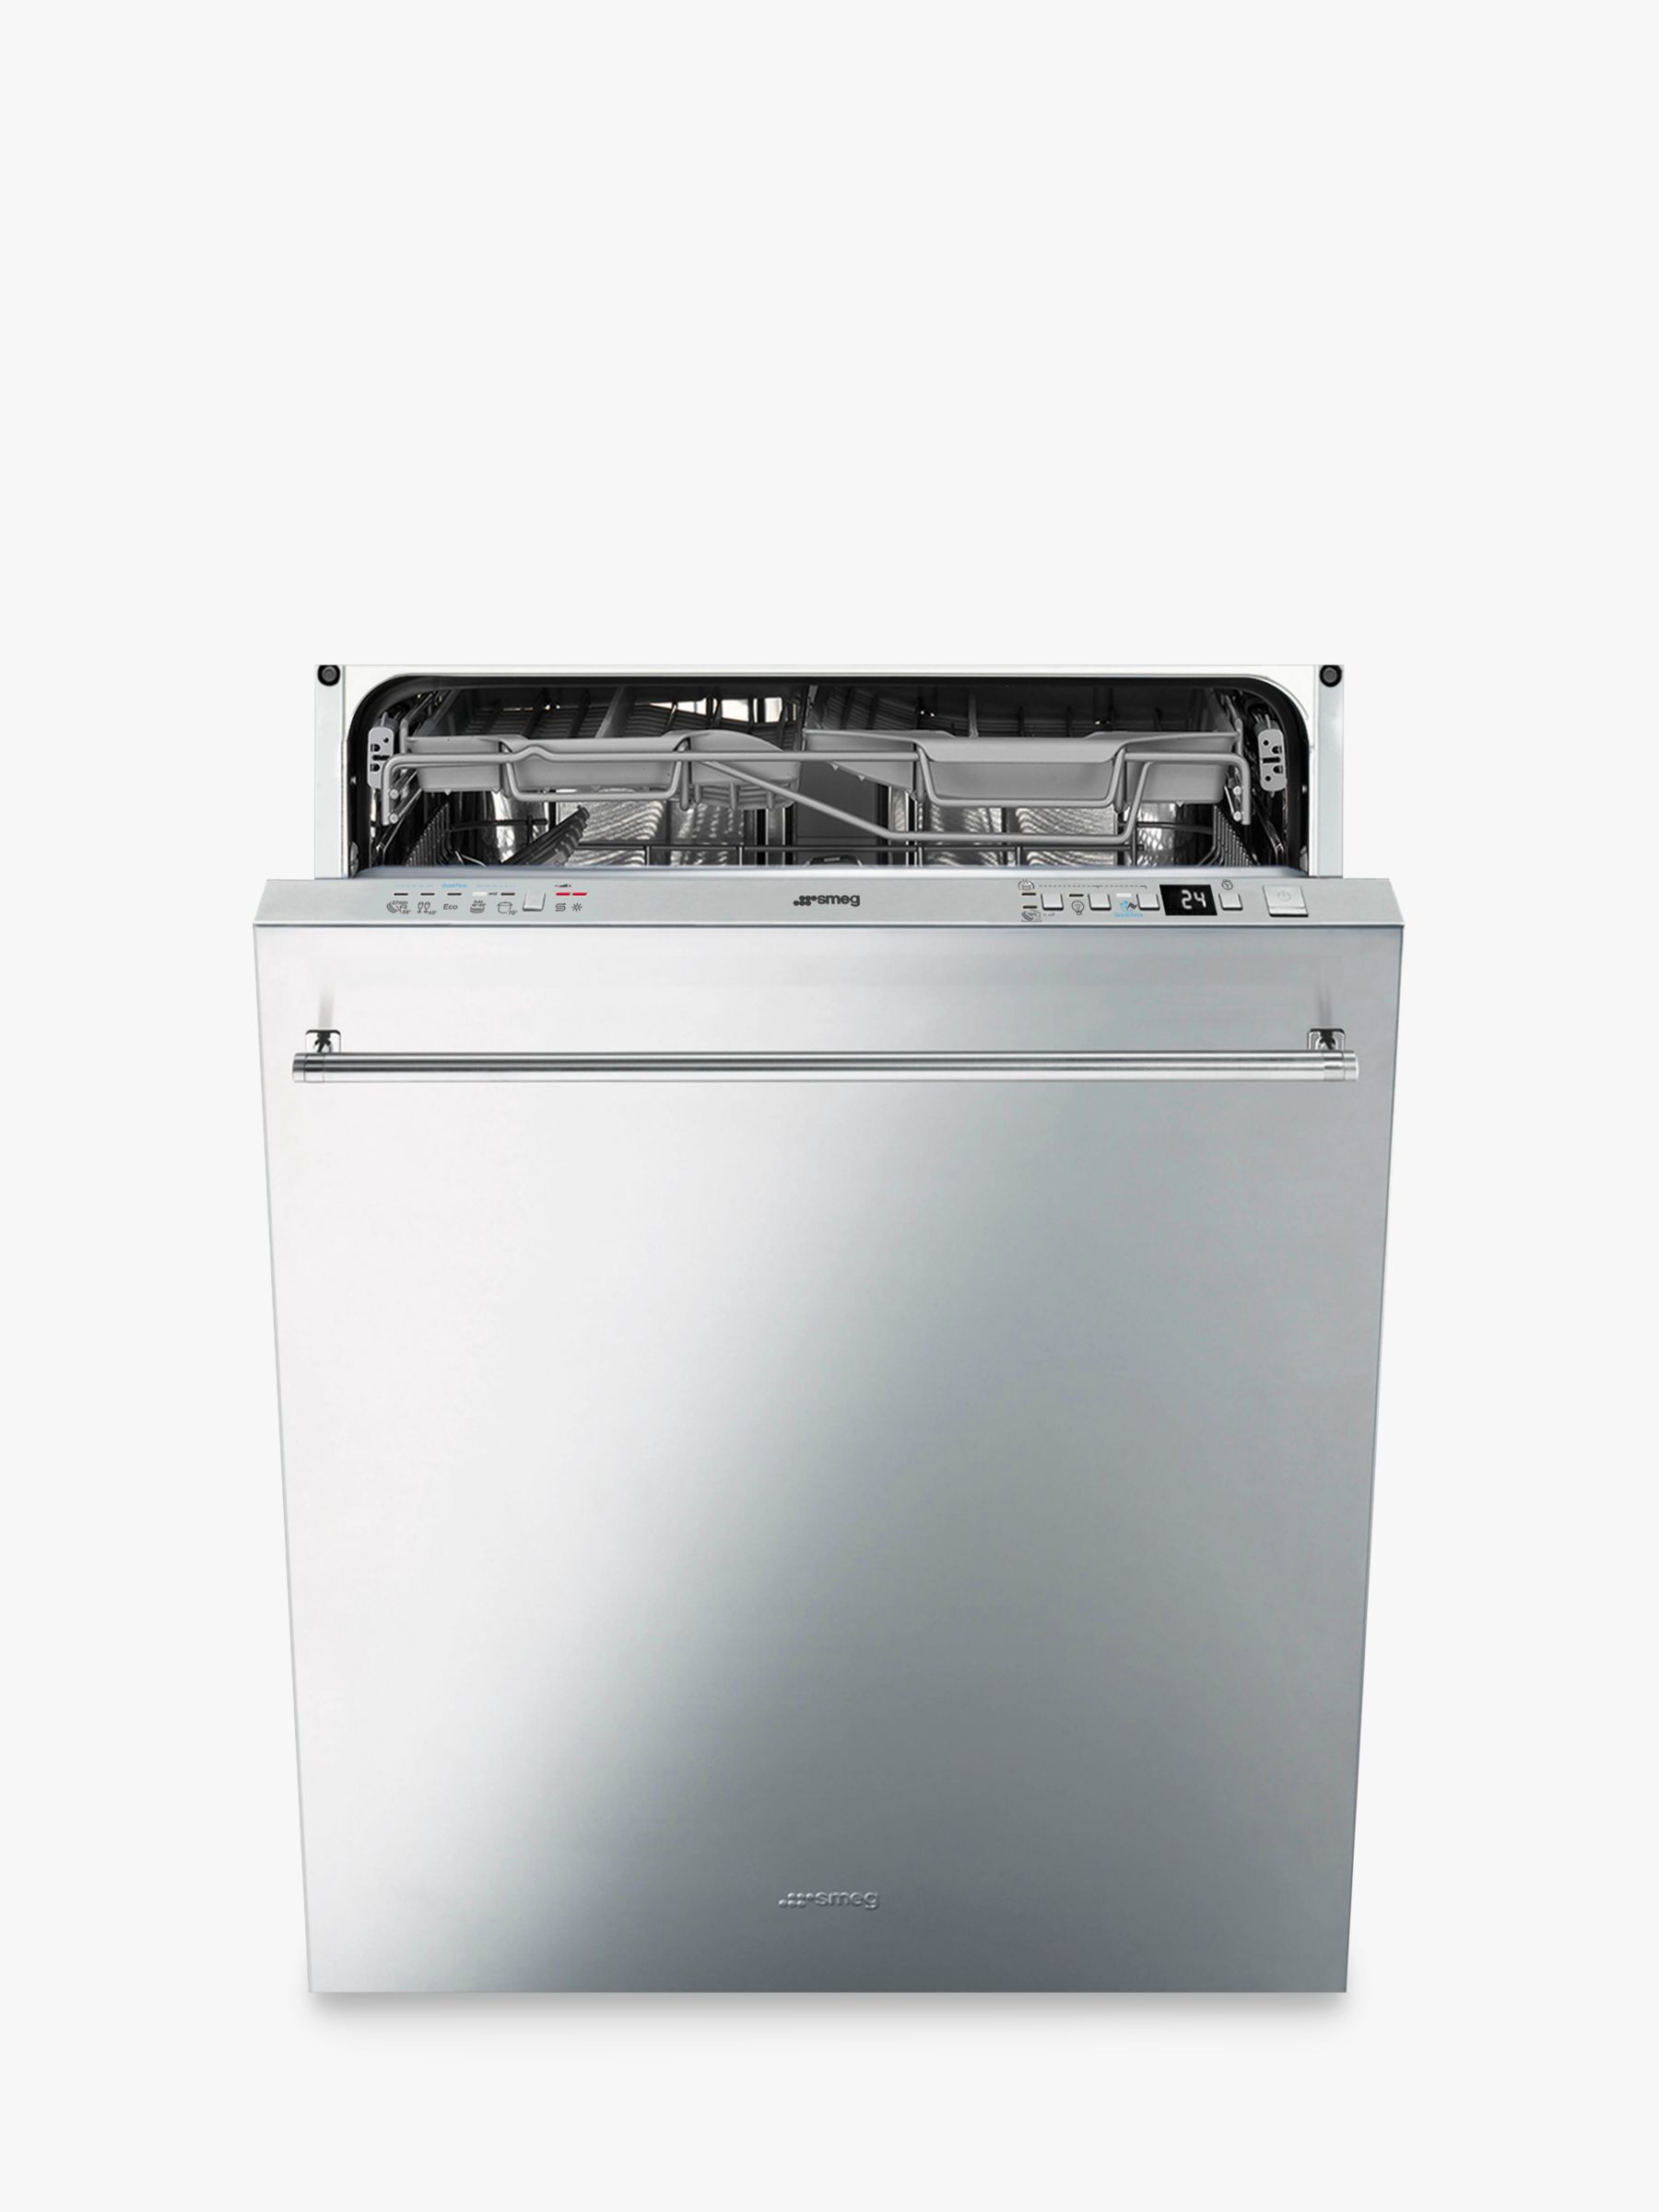 Smeg DI614PSS Integrated Dishwasher, Stainless Steel